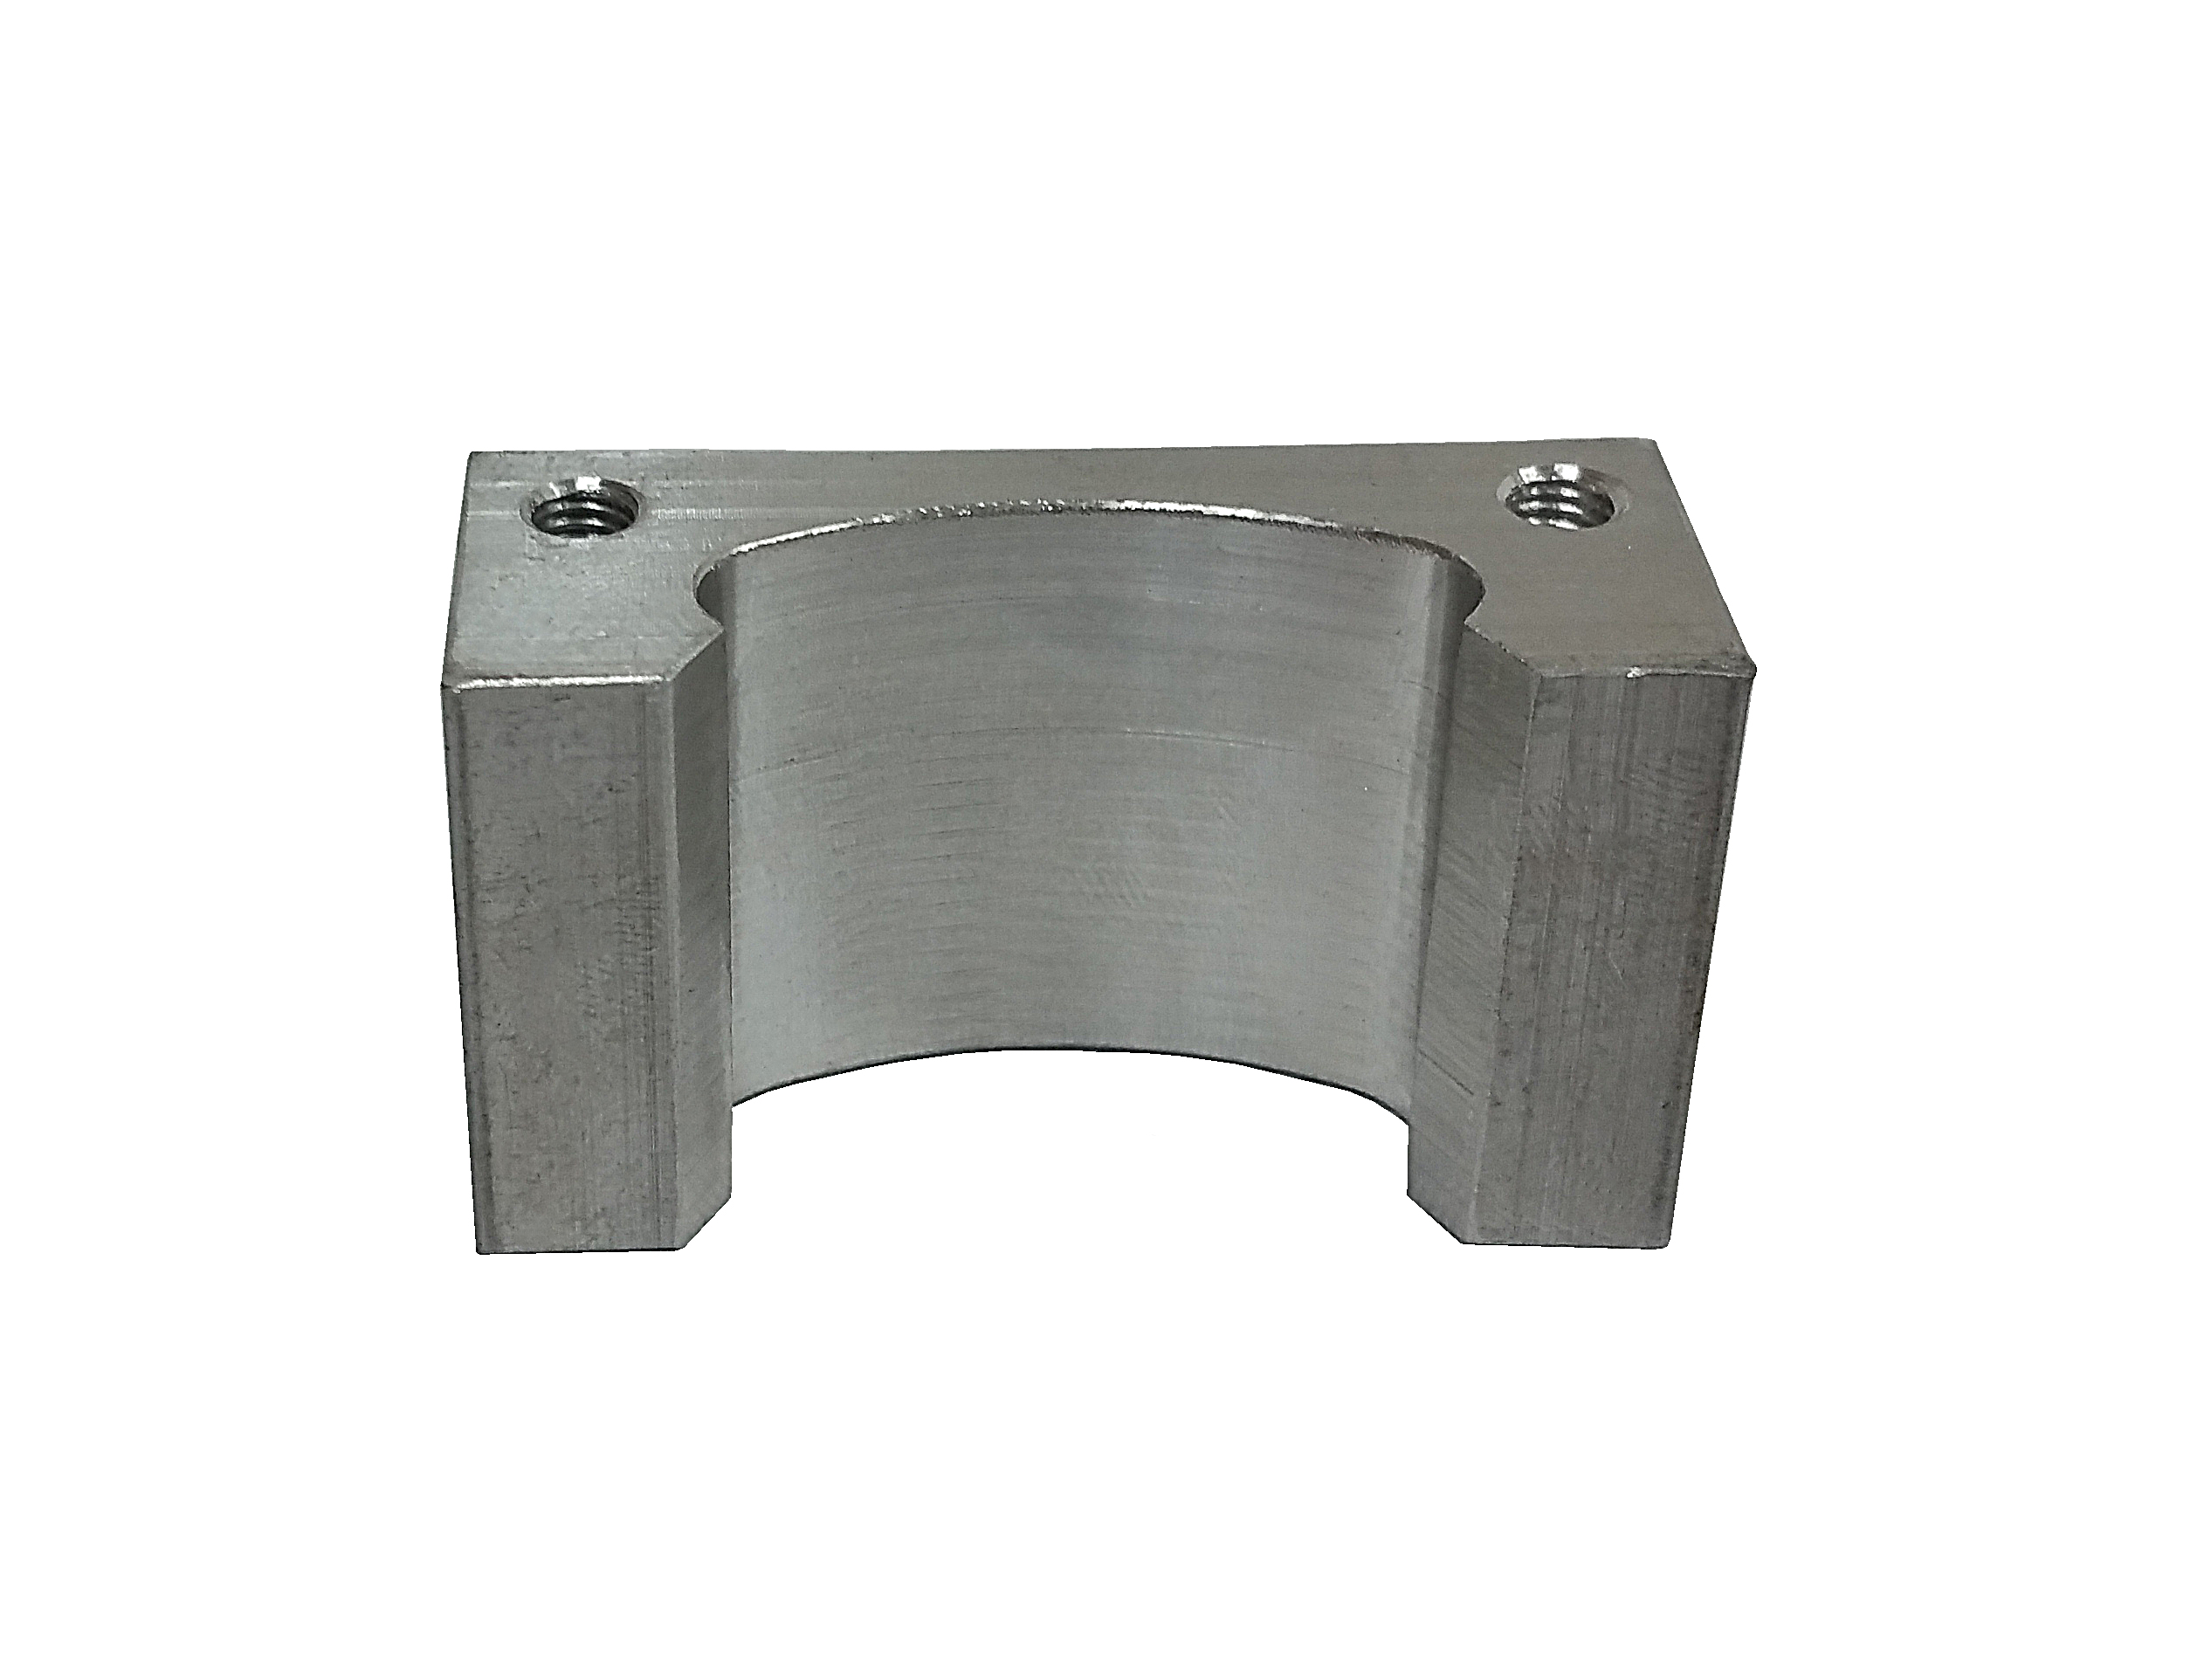 Machined Part - Aluminum bar machined to ¾ in. x 2 in. x 1⅛ in. LG. with elliptical-shaped open cut out and (2) #10-32 drilled and tapped holes